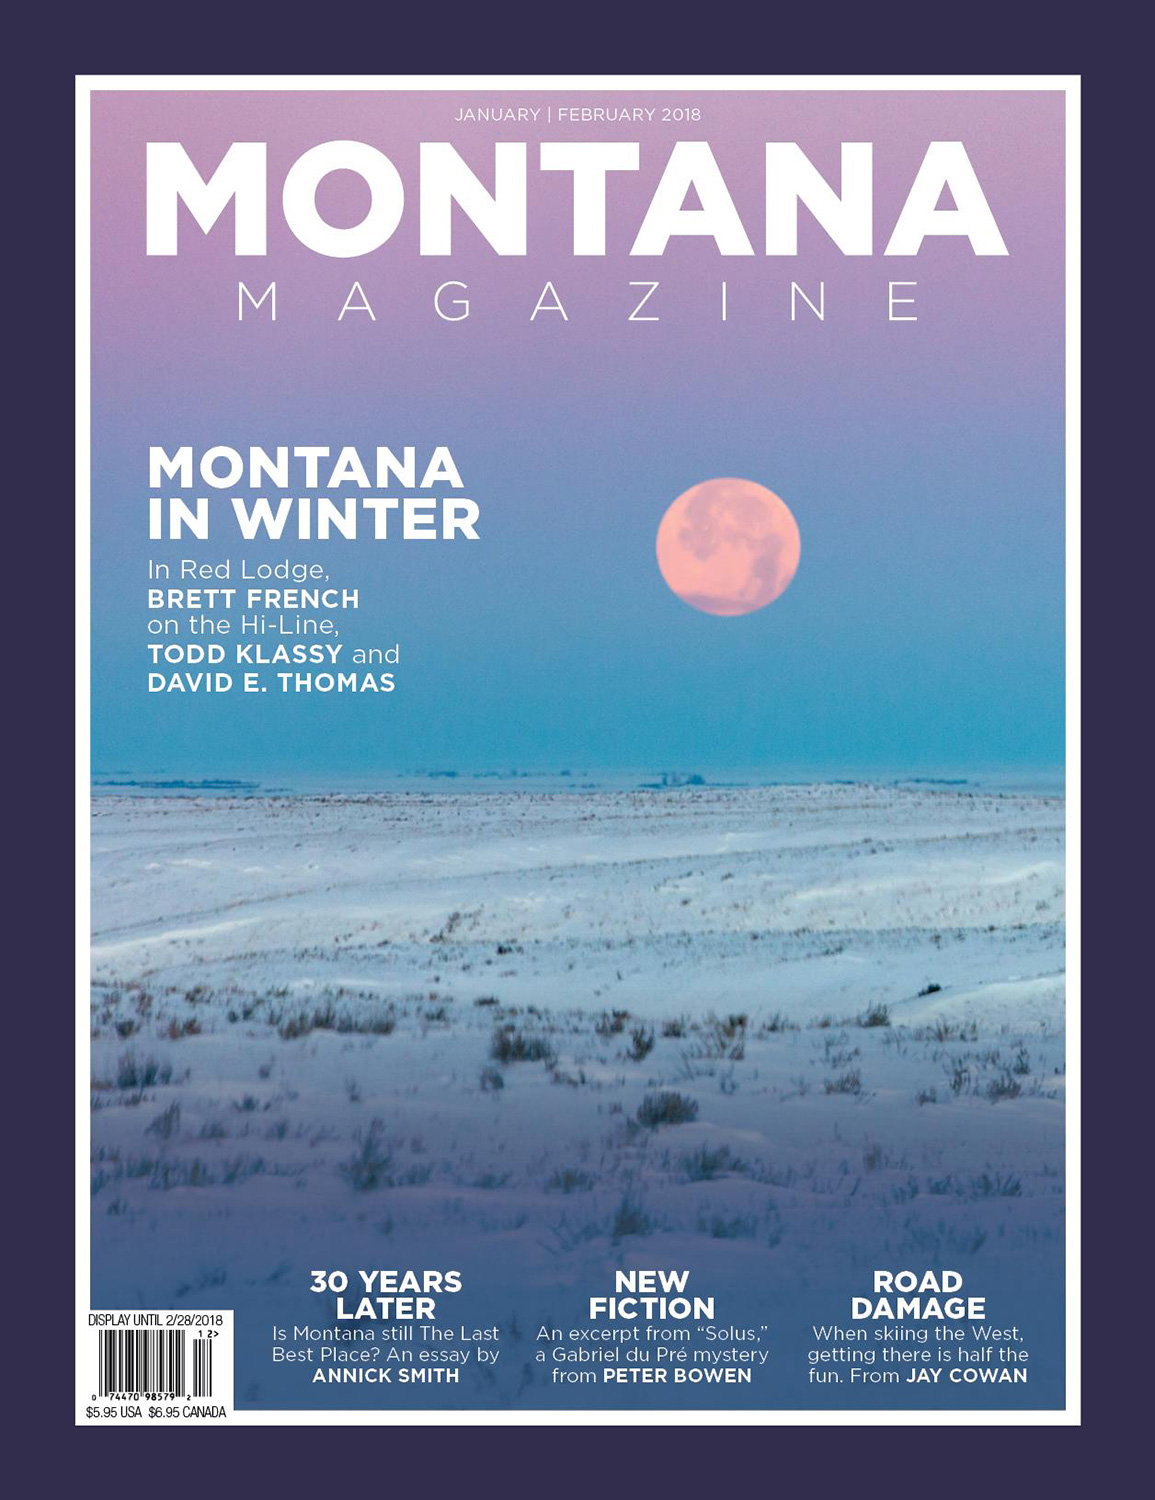 Photos of Winter in Montana on Cover of Montana Magazine